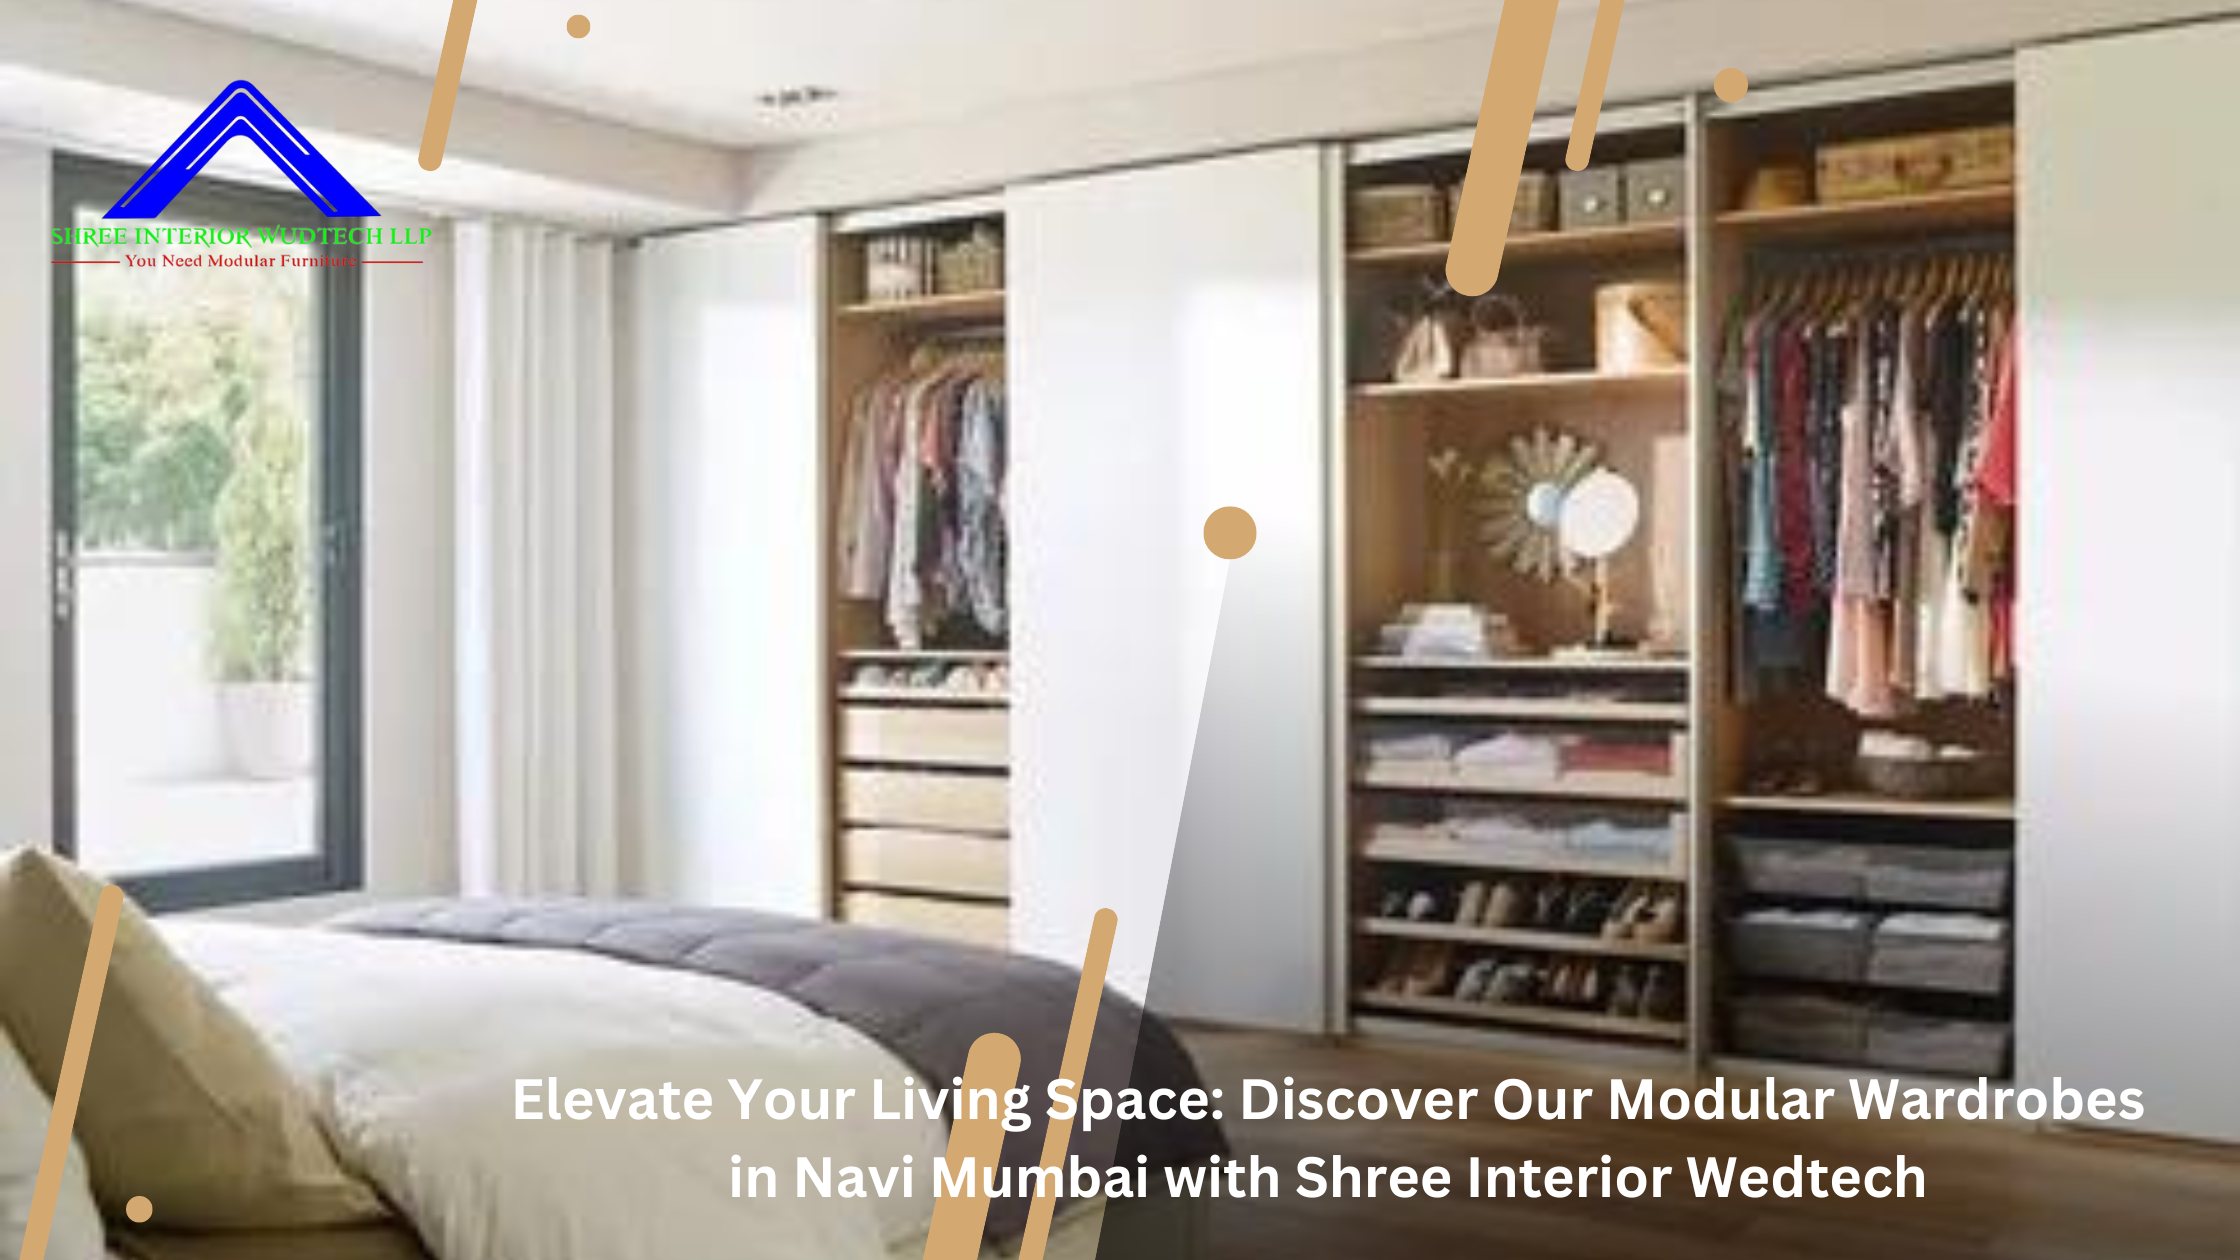 Elevate Your Living Space: Discover Our Modular Wardrobes in Navi Mumbai with Shree Interior Wedtech